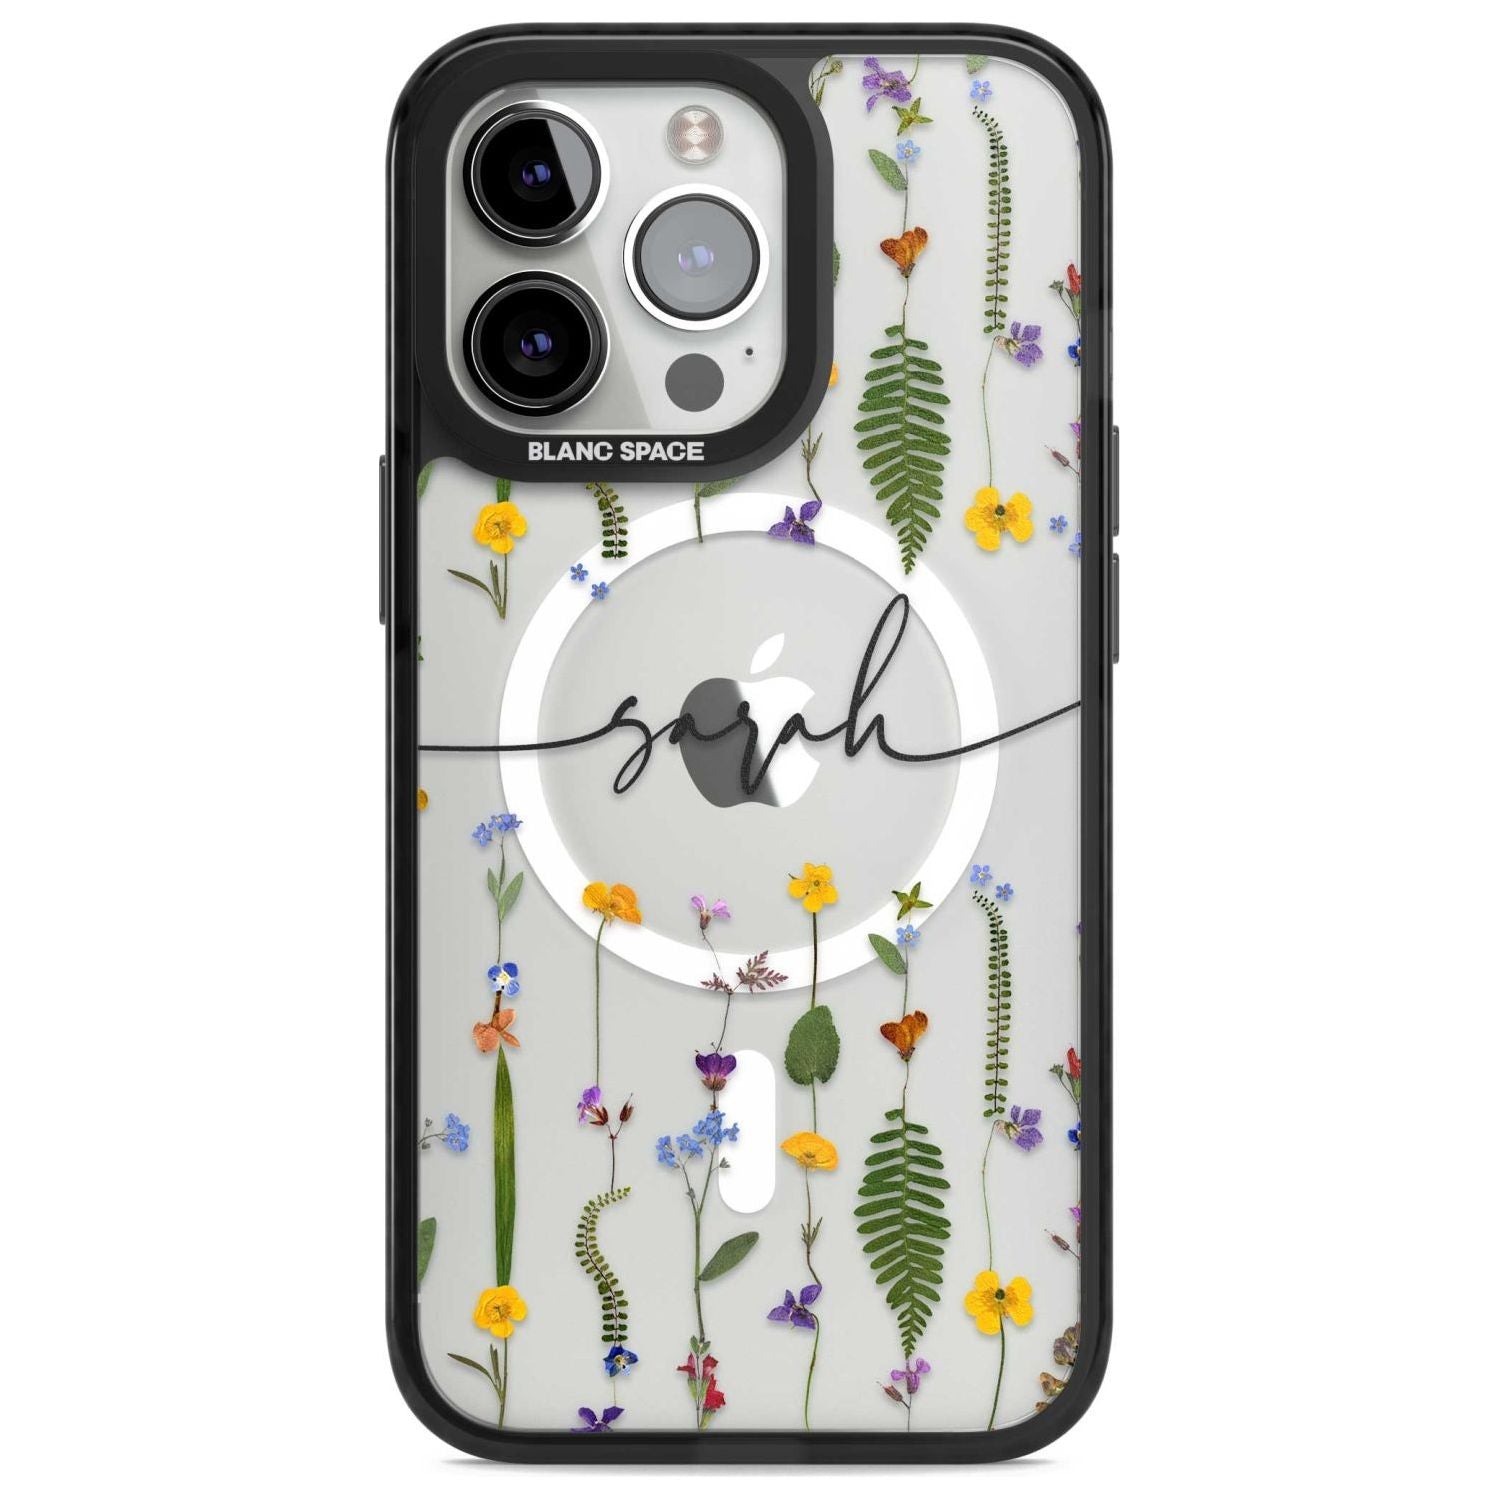 Personalised Wildflower Floral Custom Phone Case iPhone 15 Pro Max / Magsafe Black Impact Case,iPhone 15 Pro / Magsafe Black Impact Case,iPhone 14 Pro Max / Magsafe Black Impact Case,iPhone 14 Pro / Magsafe Black Impact Case,iPhone 13 Pro / Magsafe Black Impact Case Blanc Space